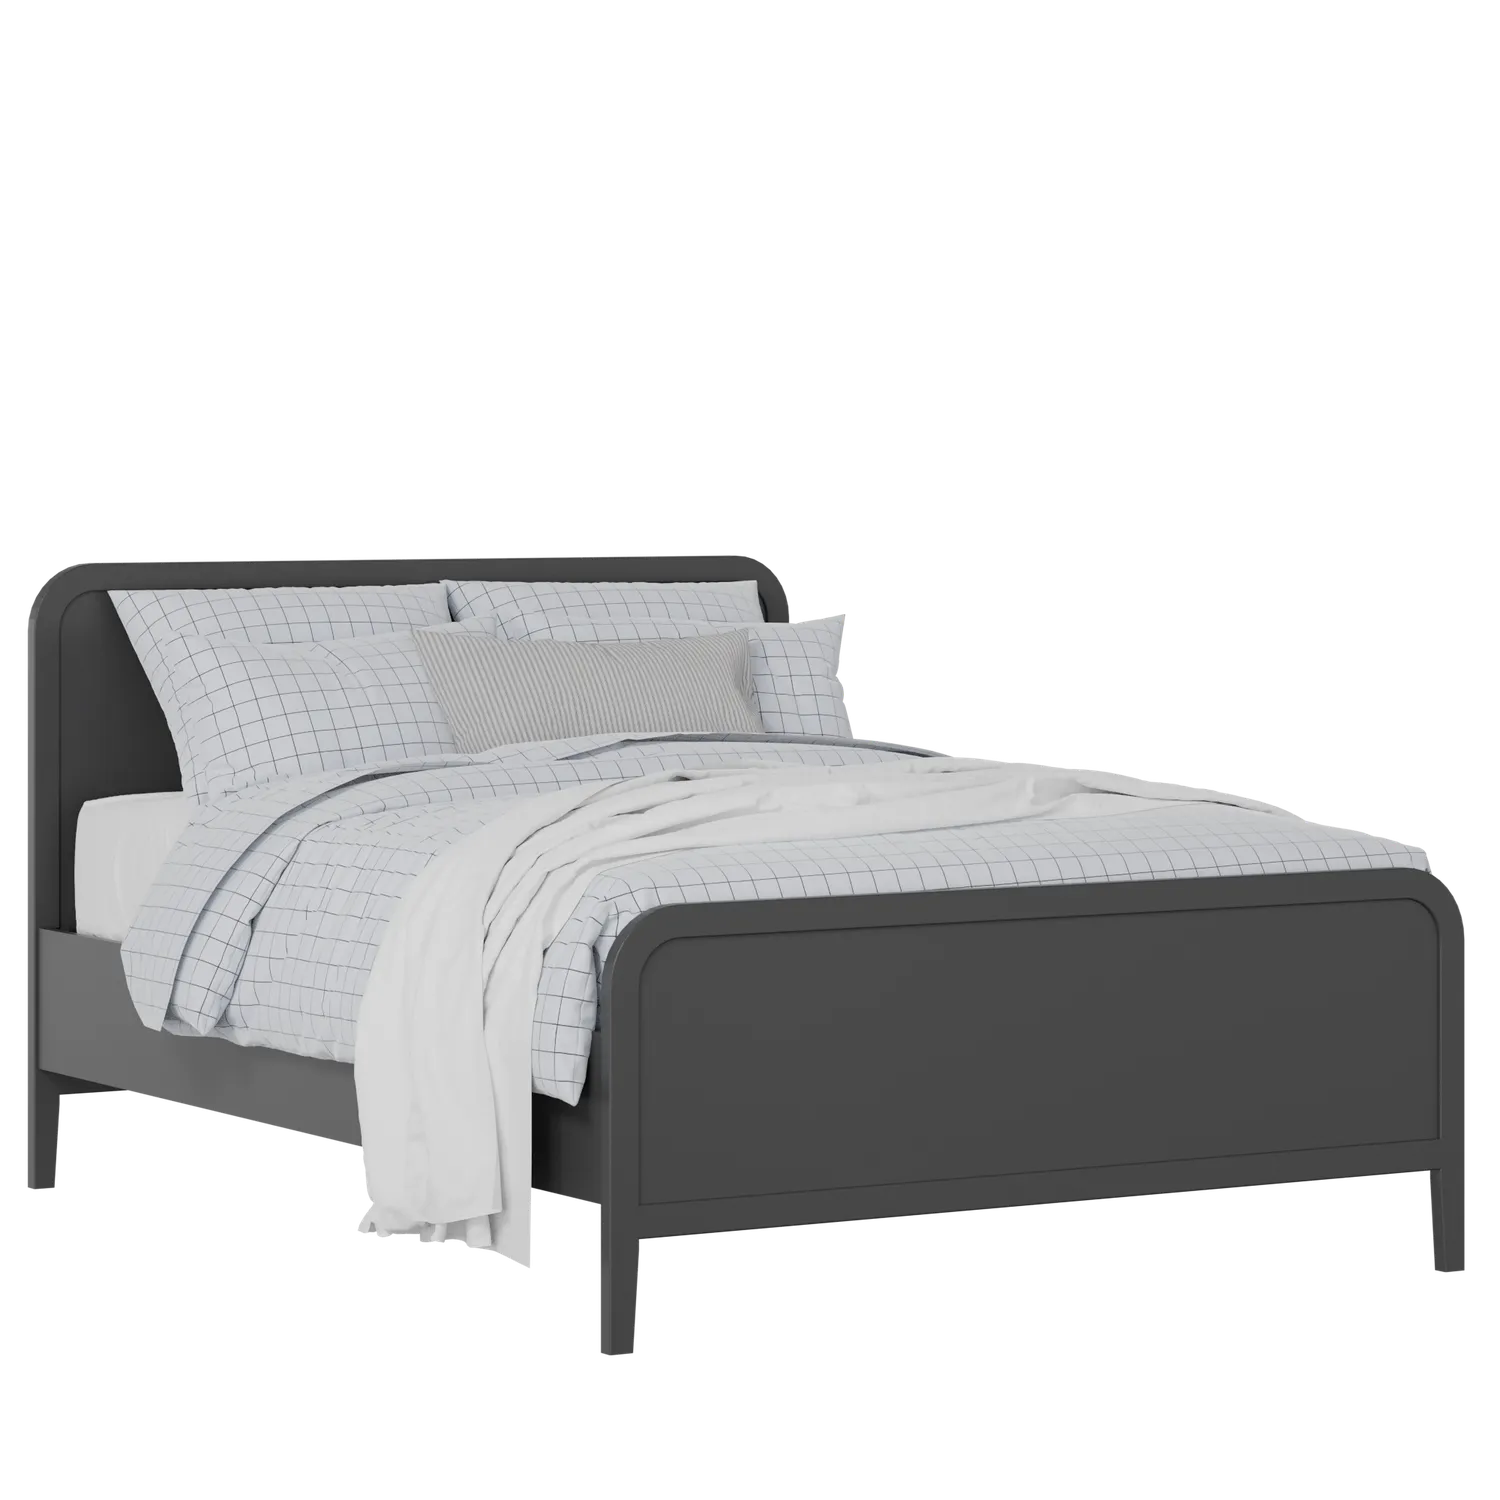 Keats painted wood bed in black with Juno mattress